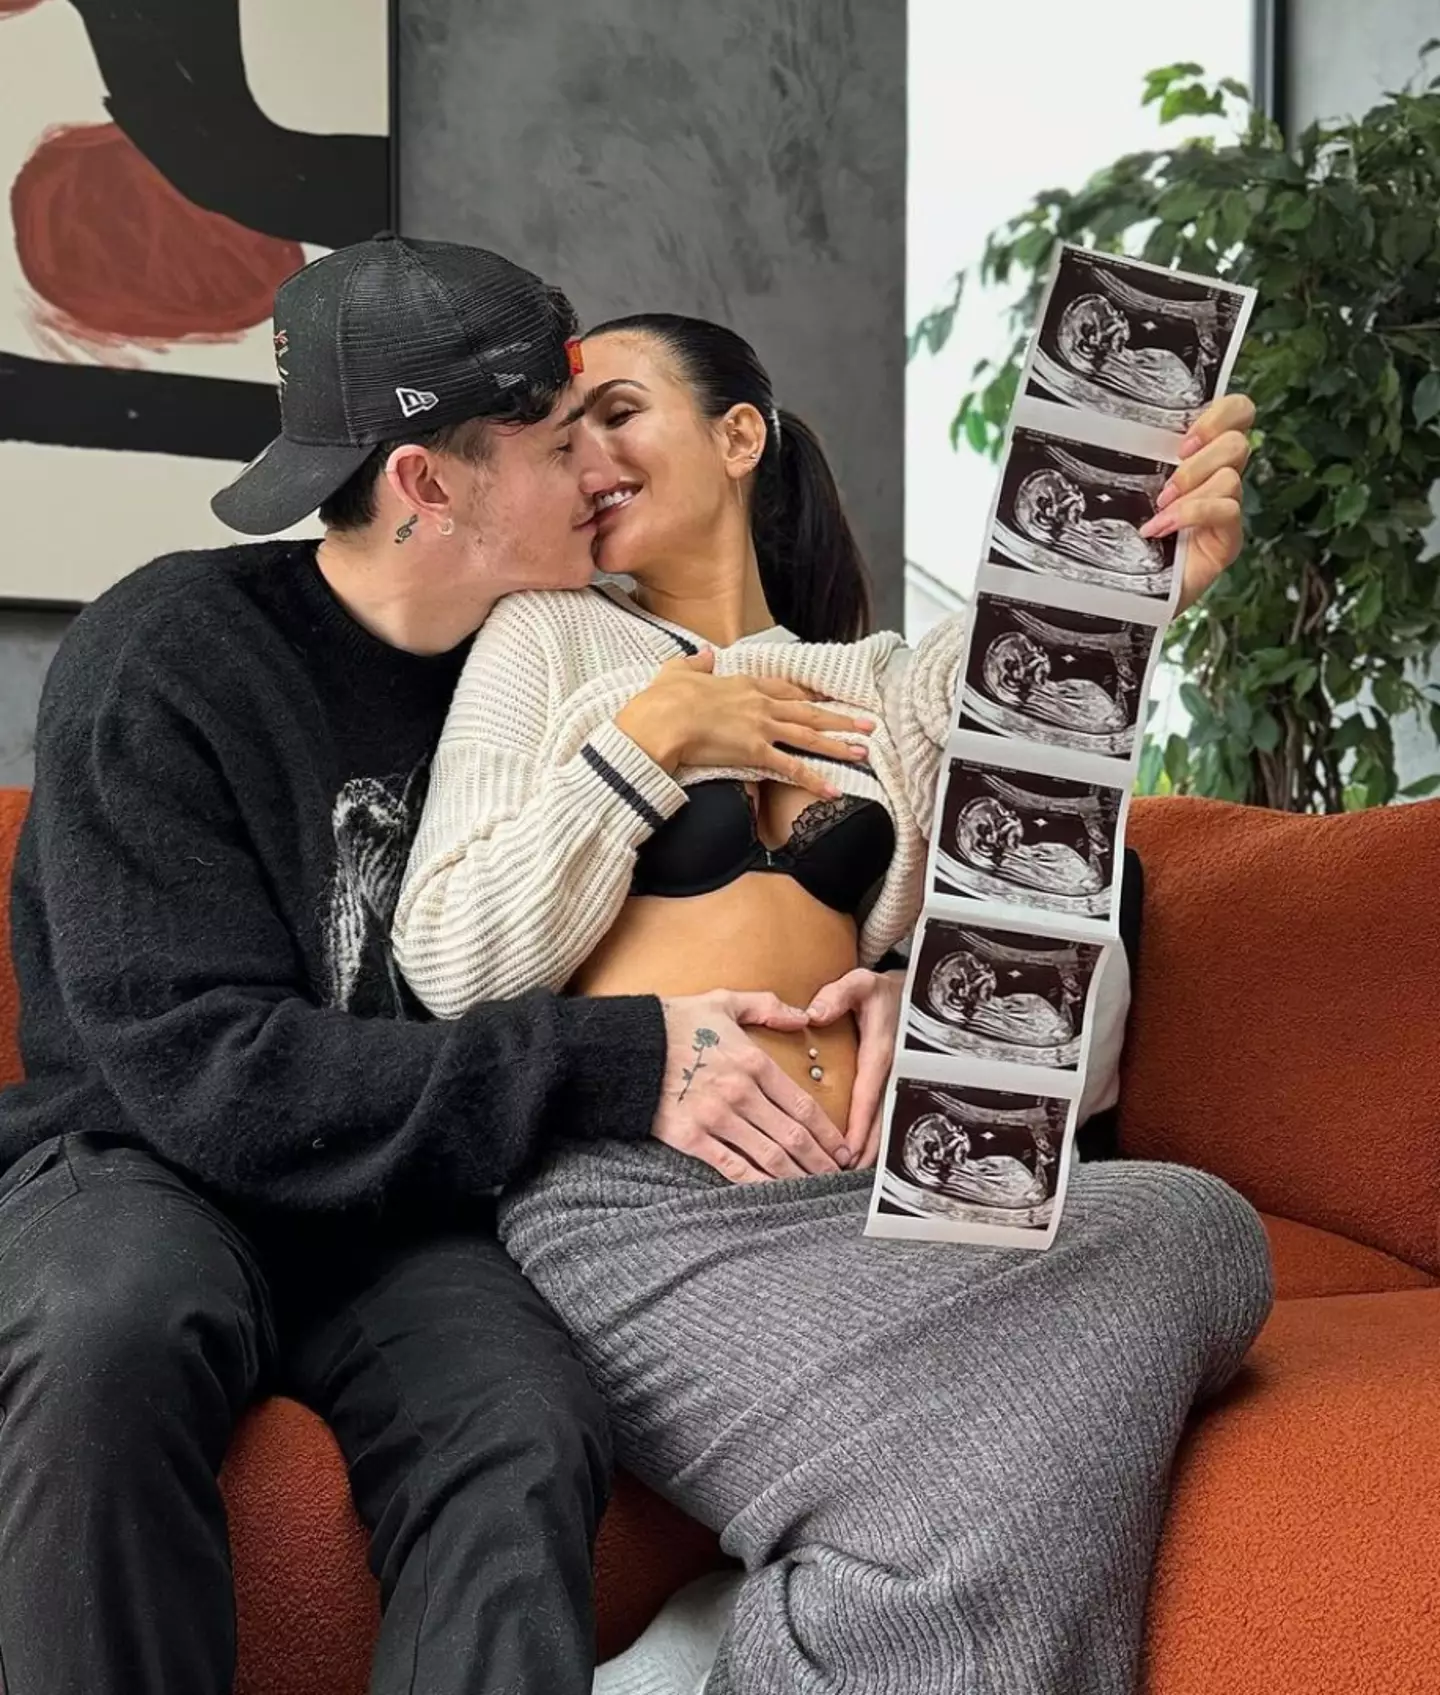 The couple announced their pregnancy earlier this week.